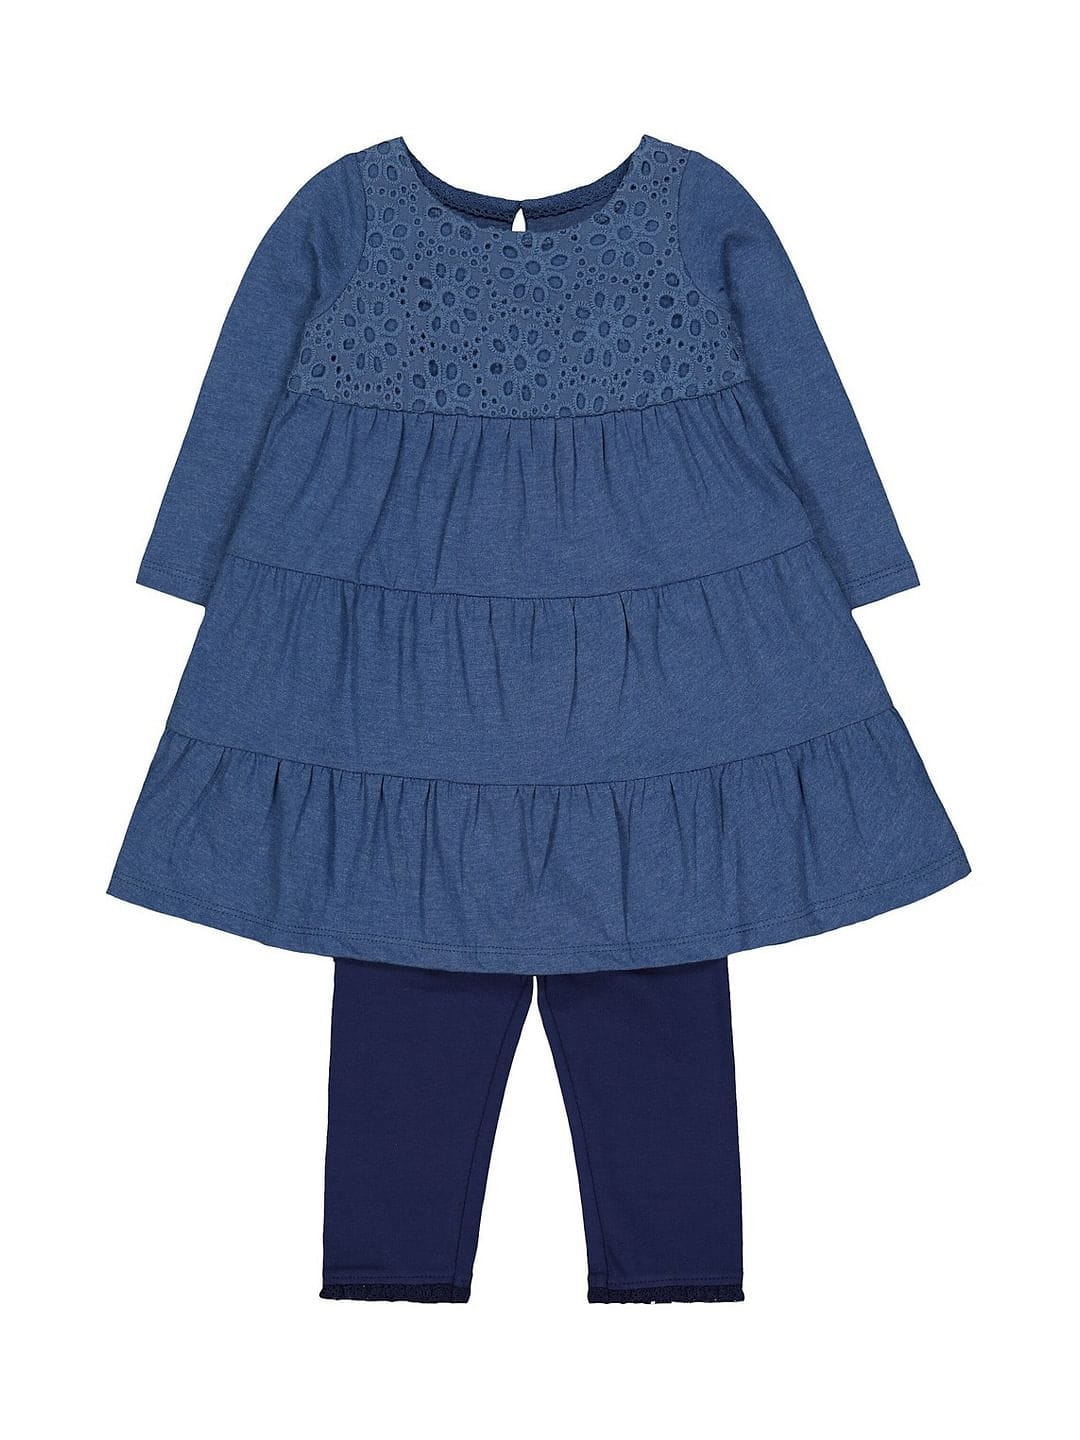 Blue Broderie Tiered Dress And Navy Leggings Set